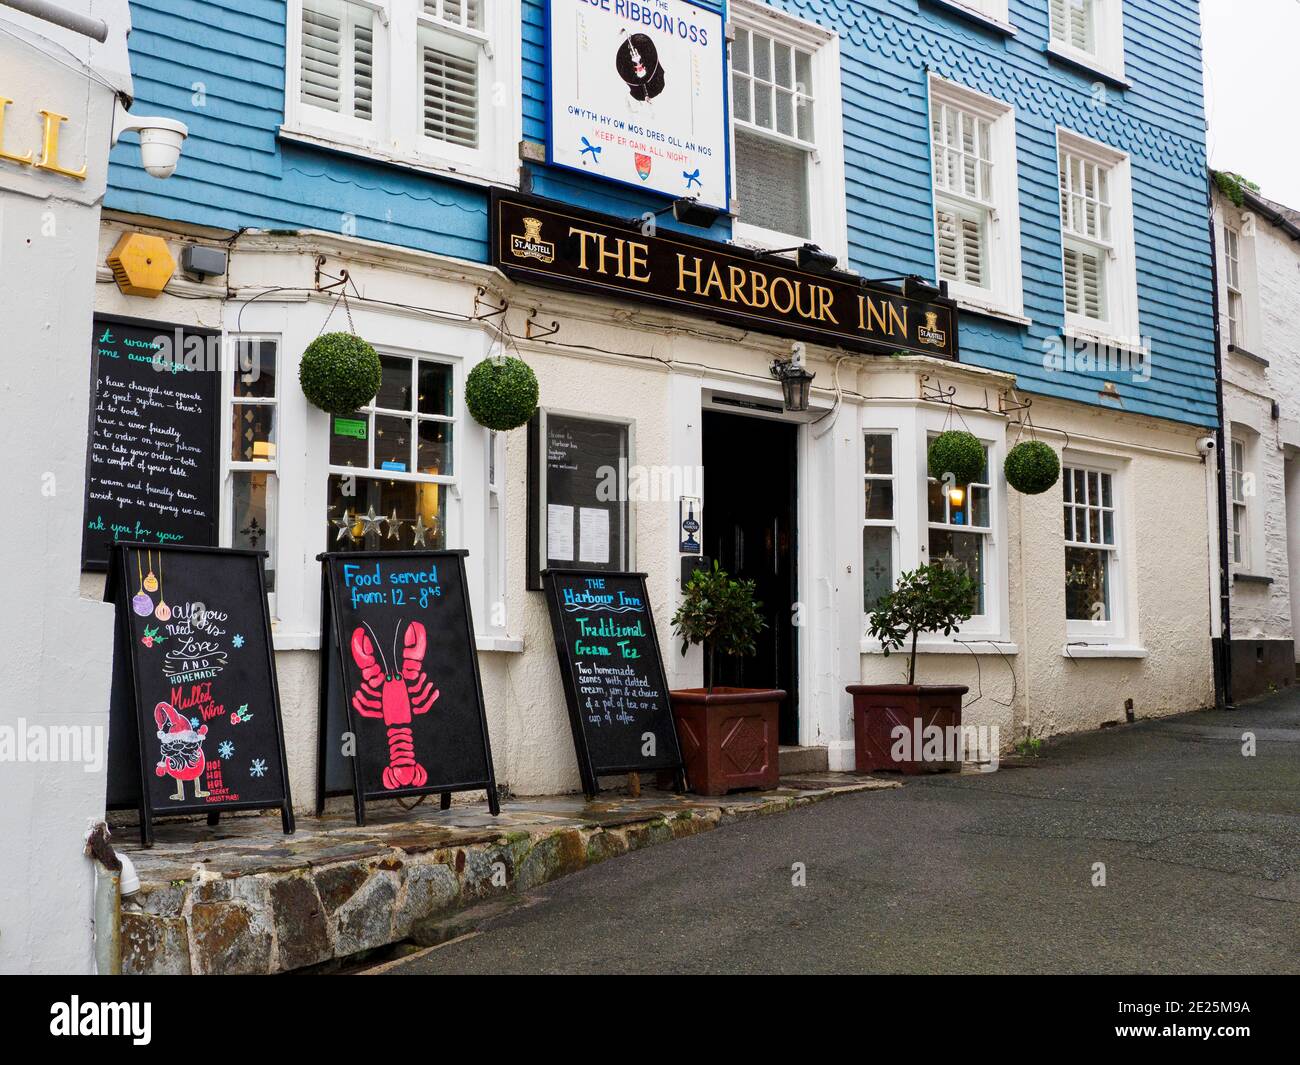 The Harbour Inn, Padstow, Cornwall, UK Stock Photo